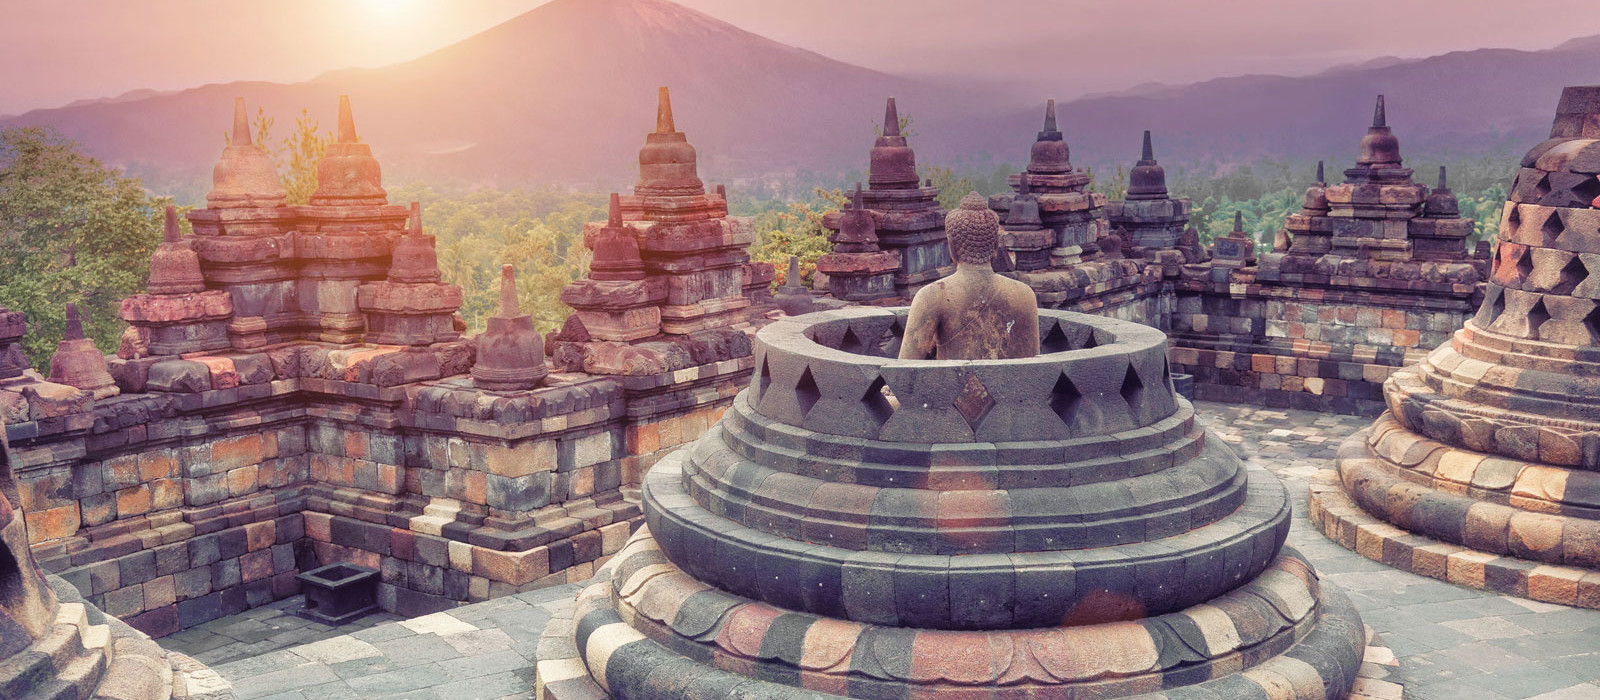  Indonesia History  Guide Travel Tips Enchanting Travels